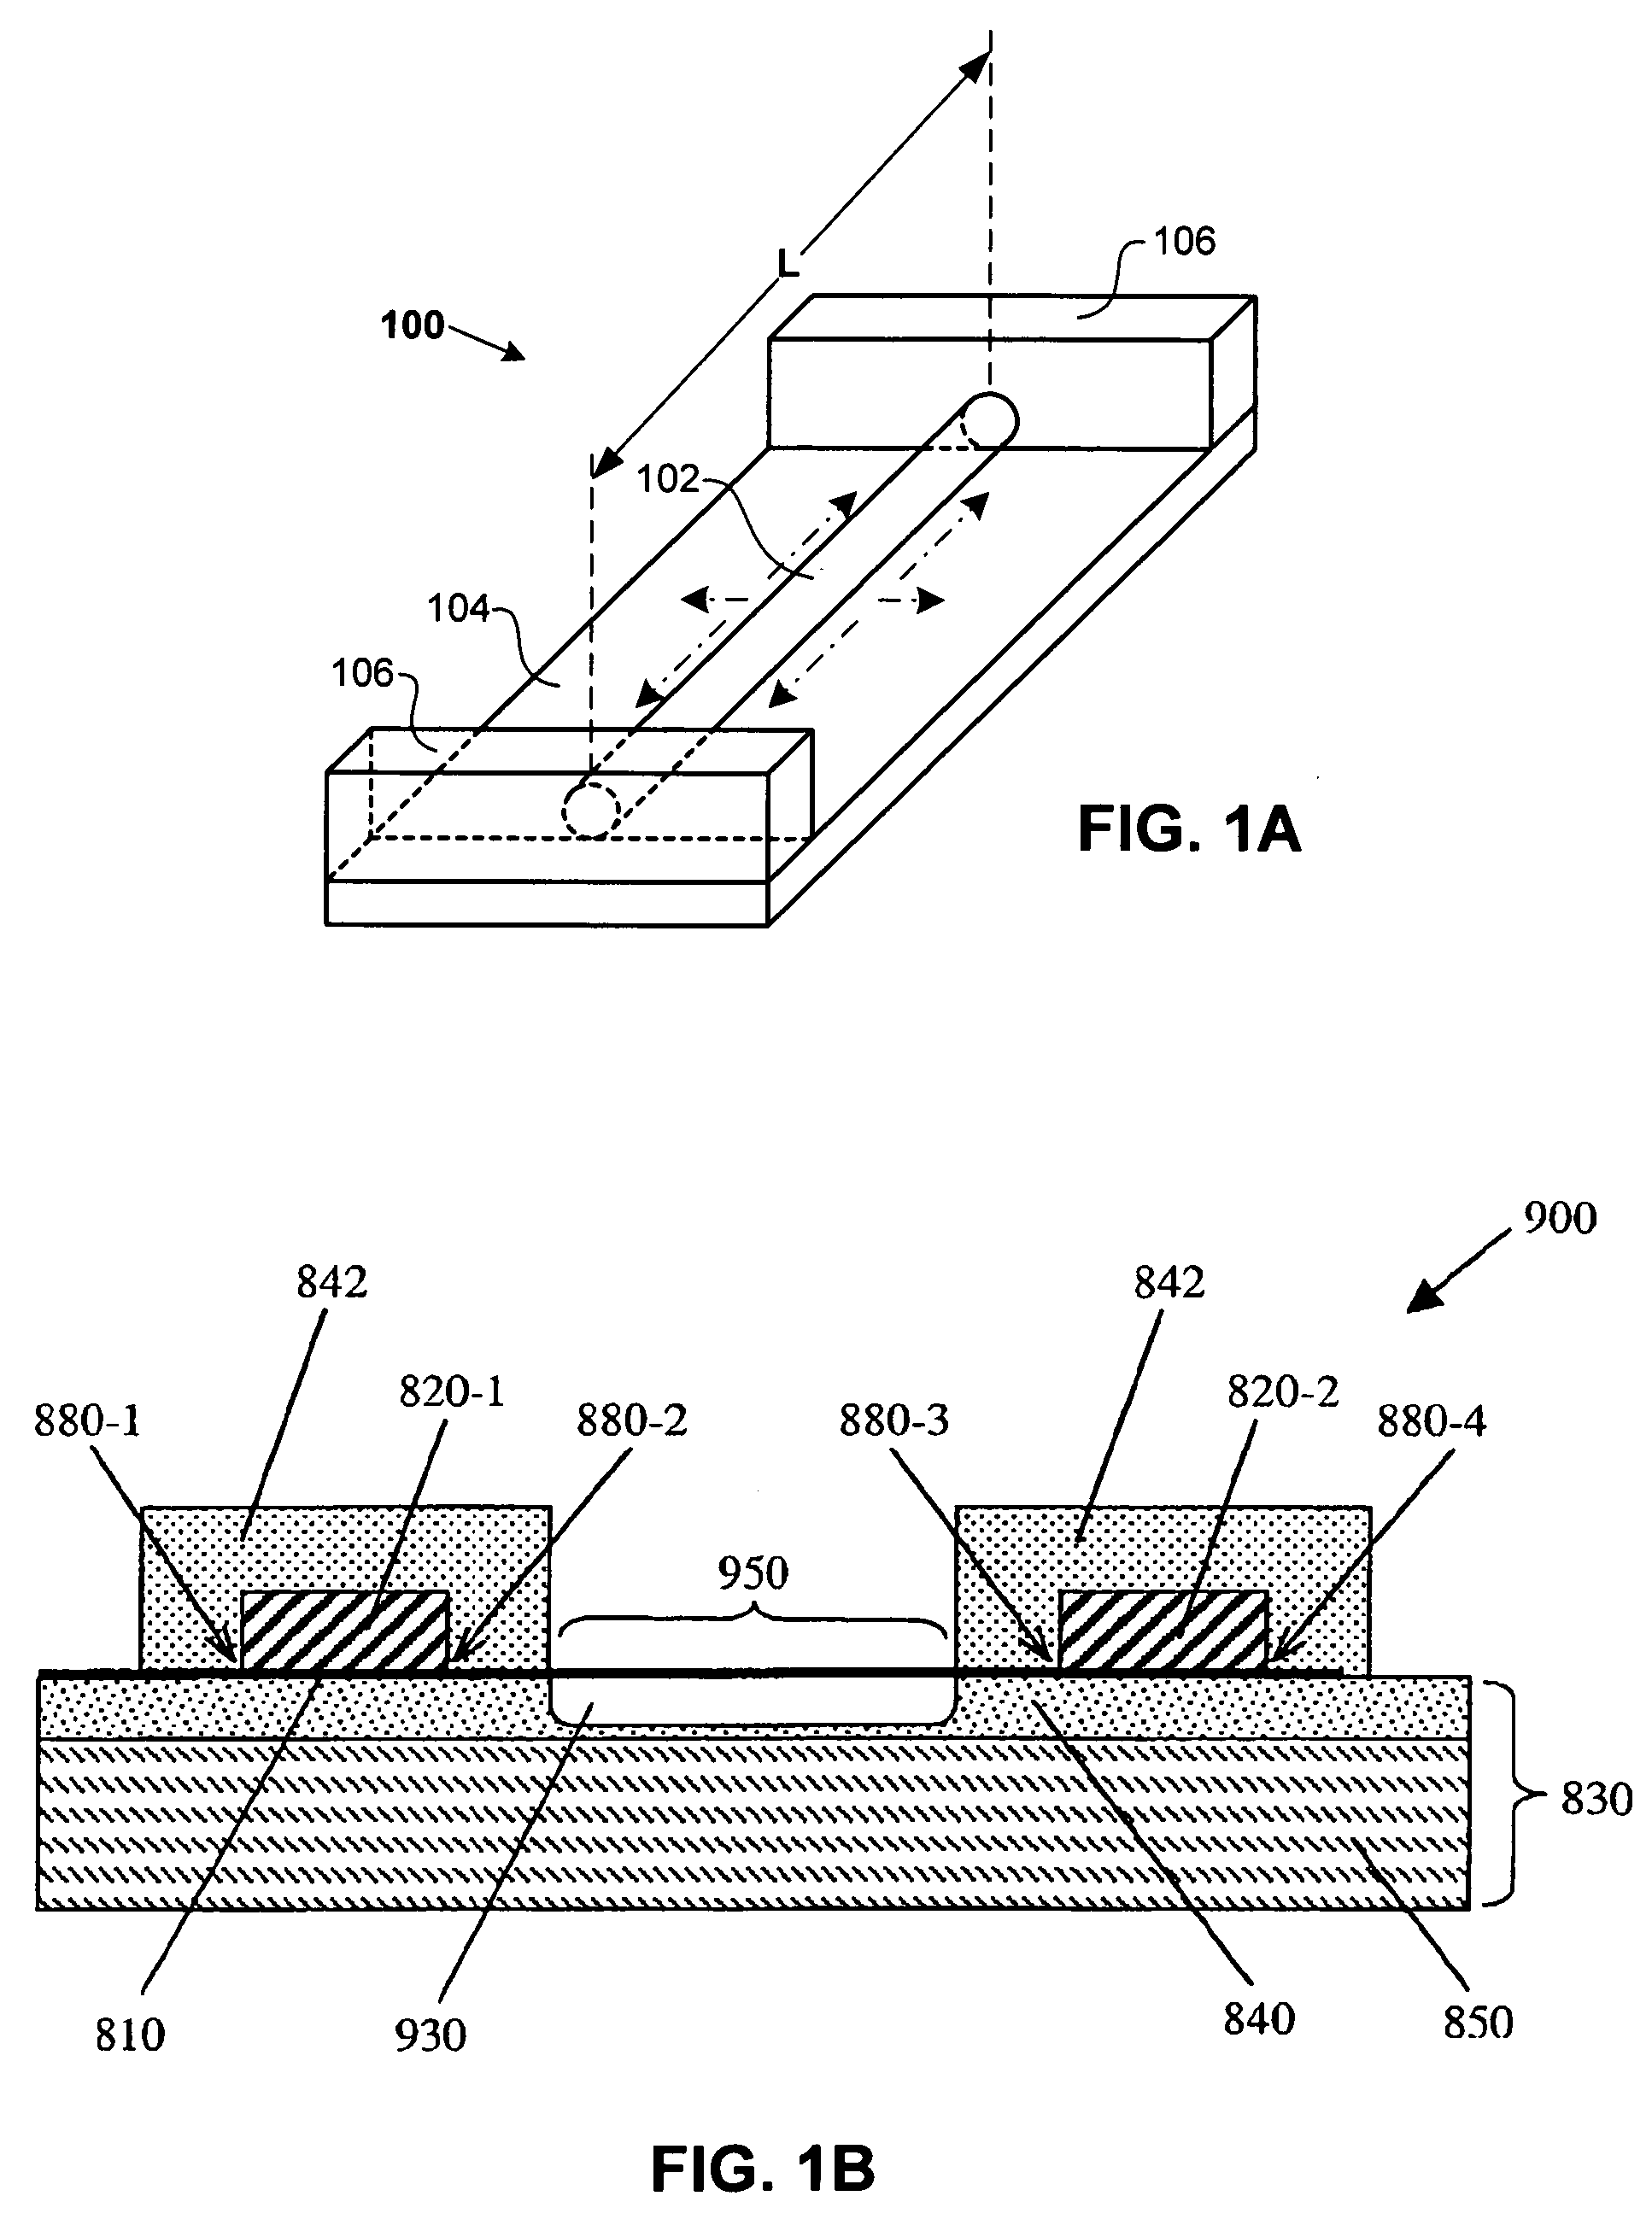 Nanoelectronic sensor with integral suspended micro-heater